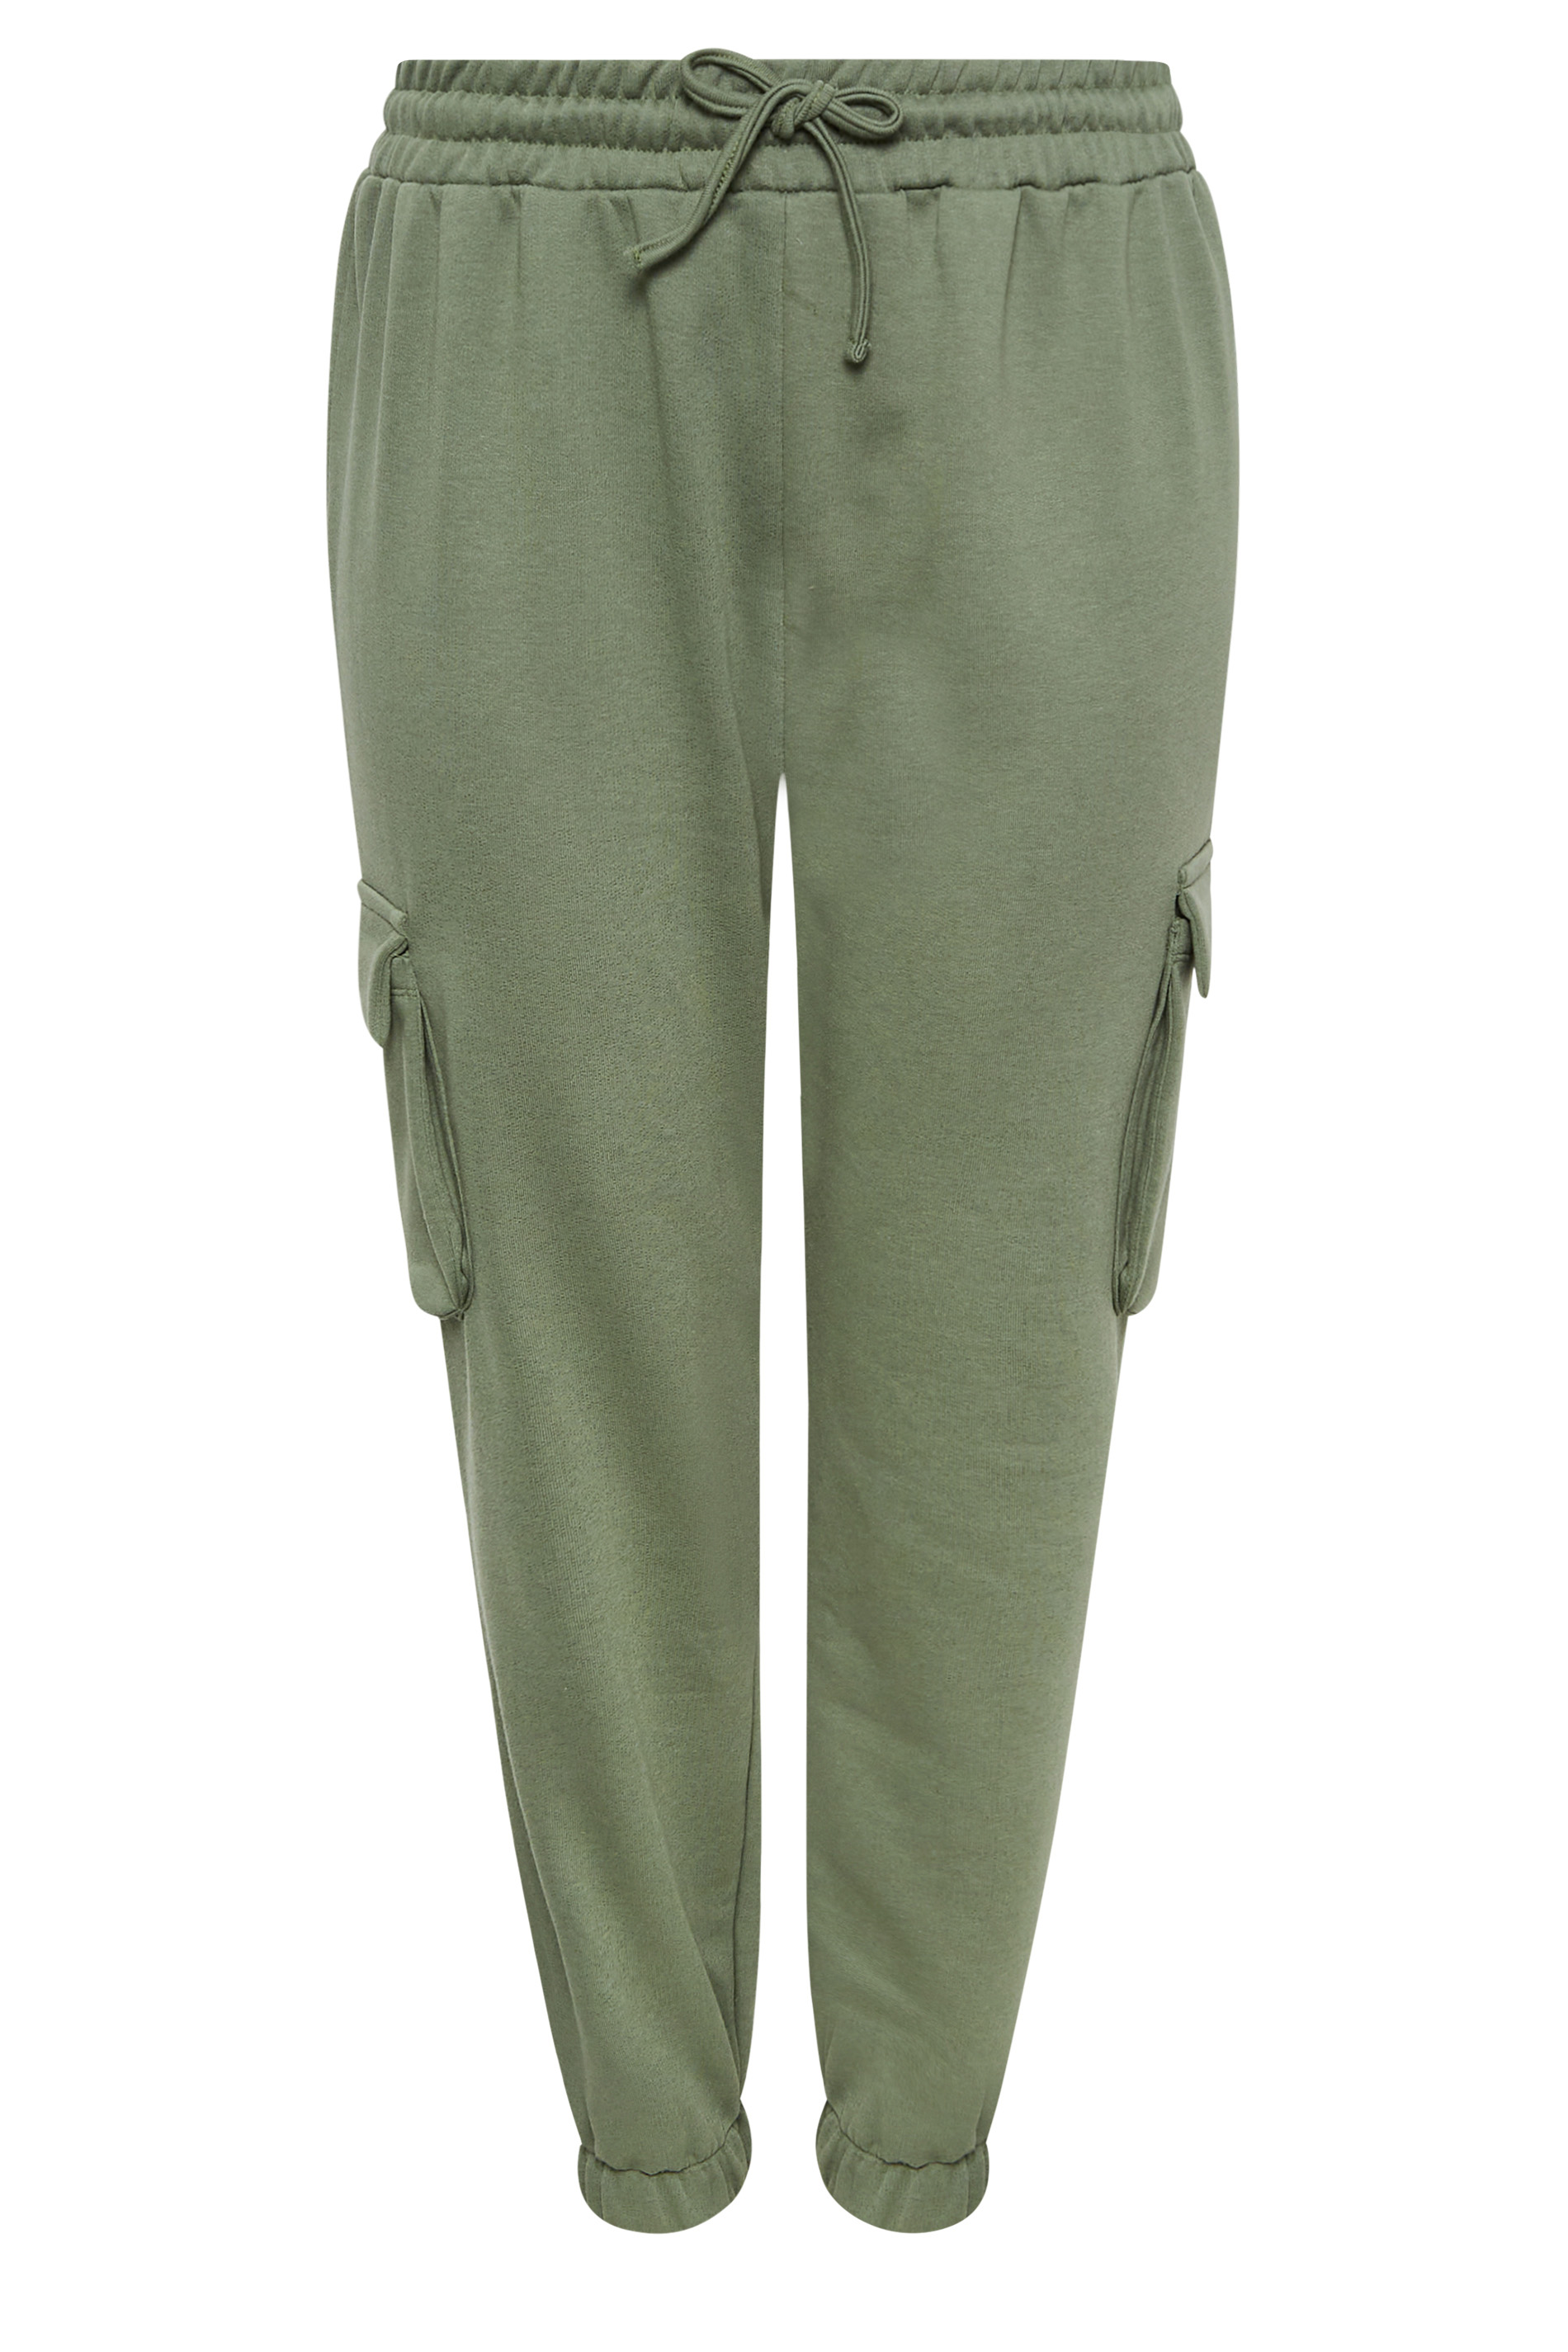 YOURS Curve Plus Size Khaki Green Cargo Joggers | Yours Clothing